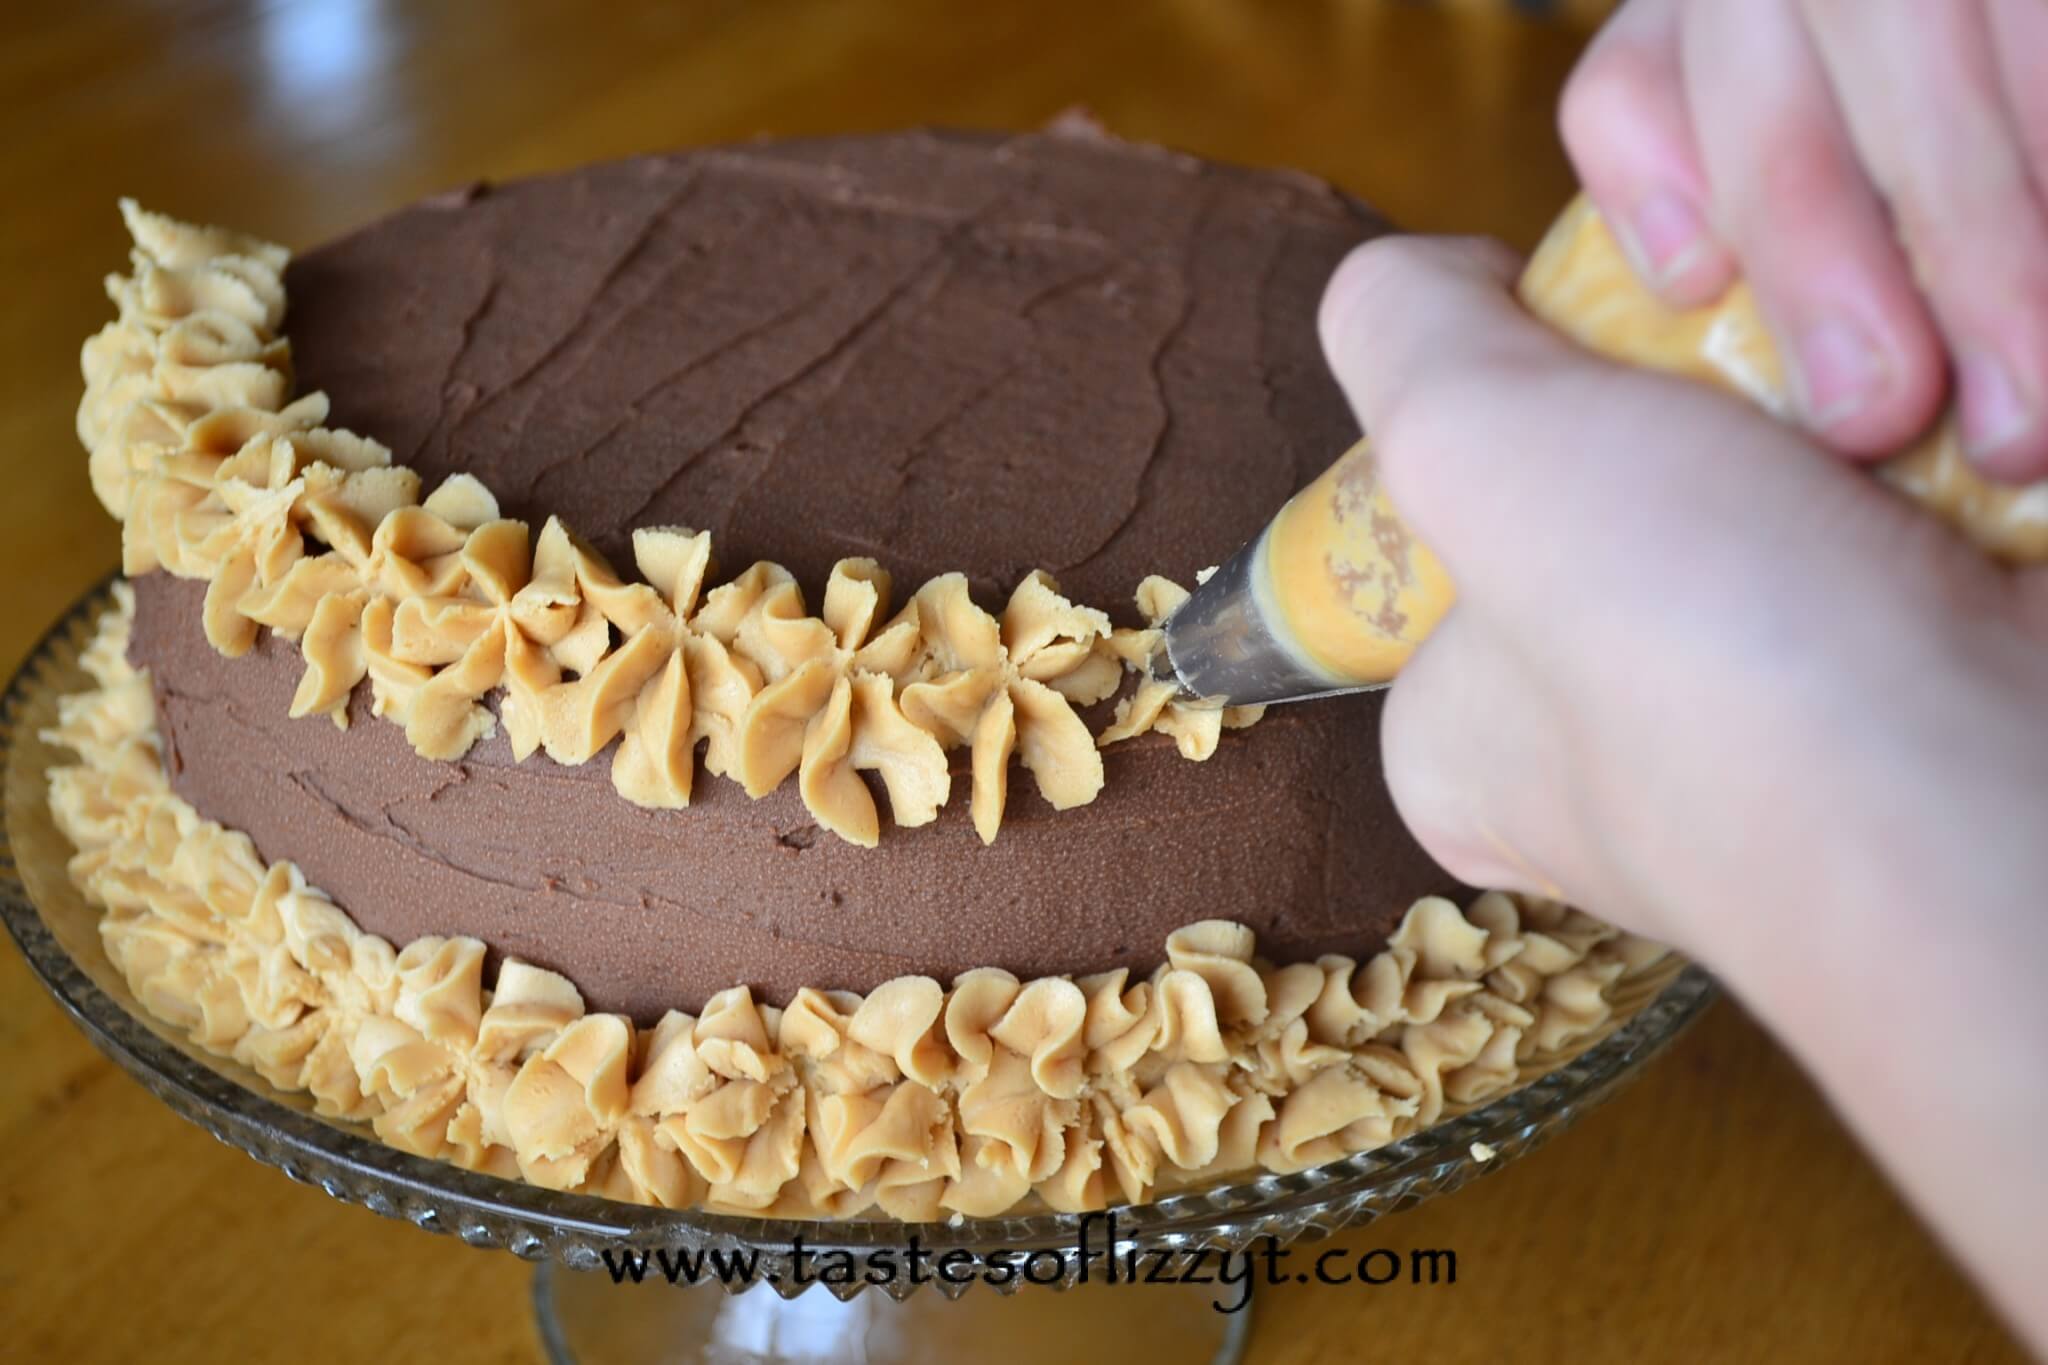 piping peanut butter frosting on a chocolate peanut butter cake